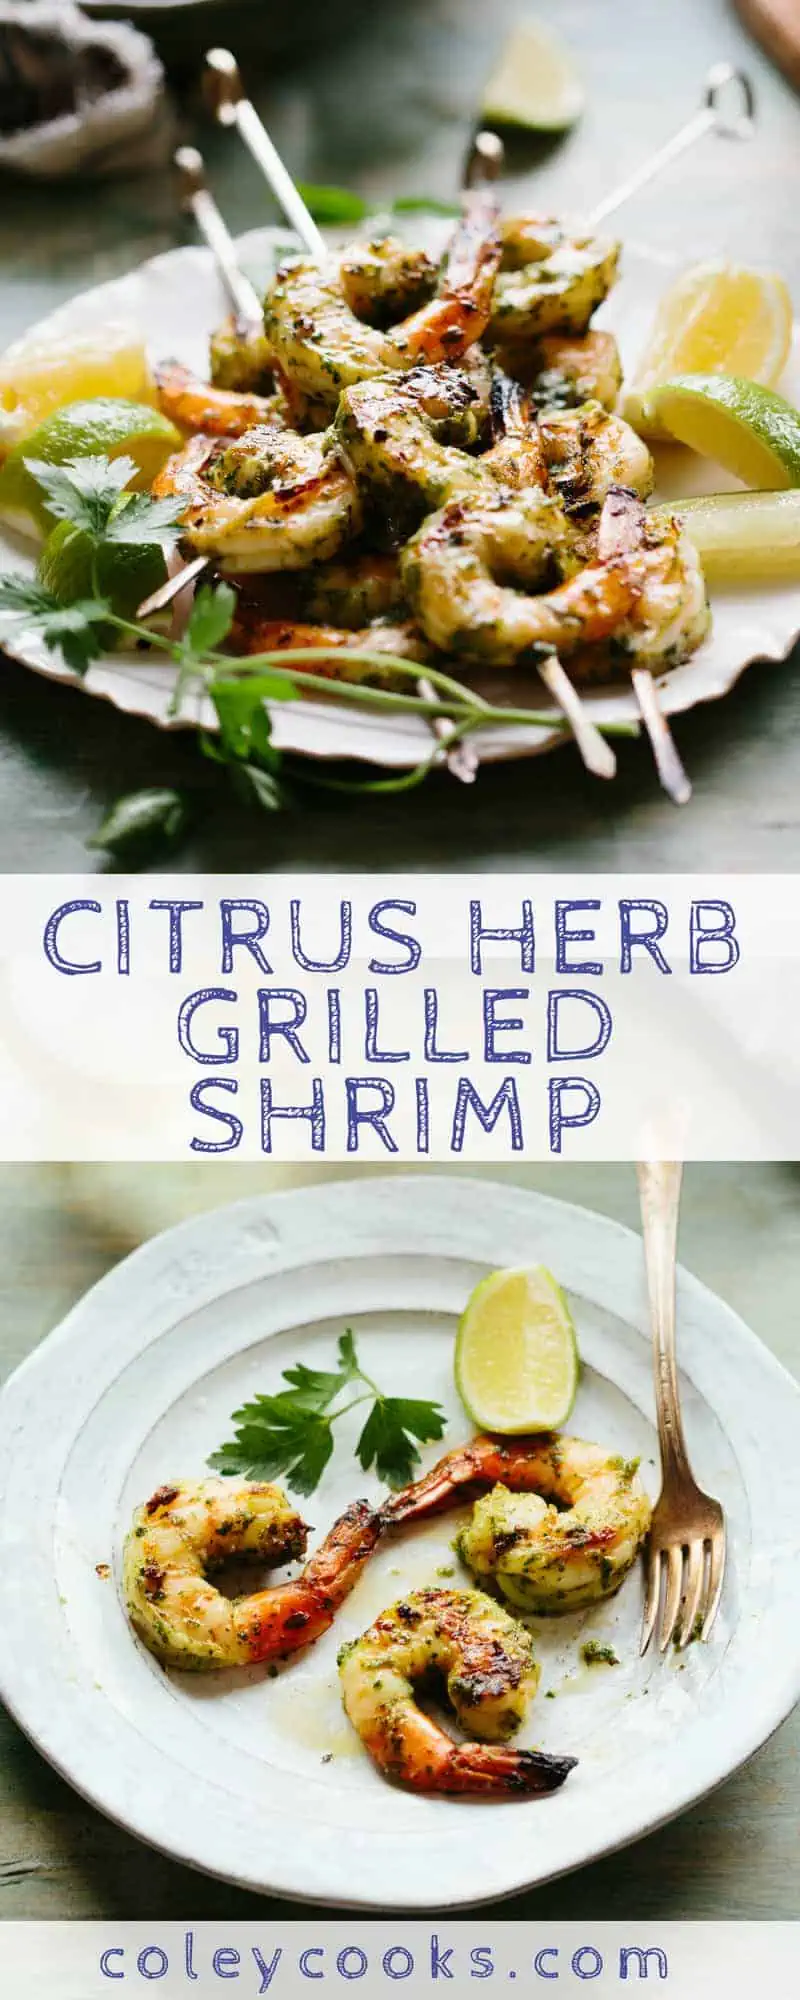 Citrus Herb Grilled Shrimp is easy, healthy and delicious dinner recipe! Great easy weeknight dinner idea or seafood appetizer. A great recipe for entertaining! #easy #shrimp #recipe #entertaining #grilled #dinner | ColeyCooks.com